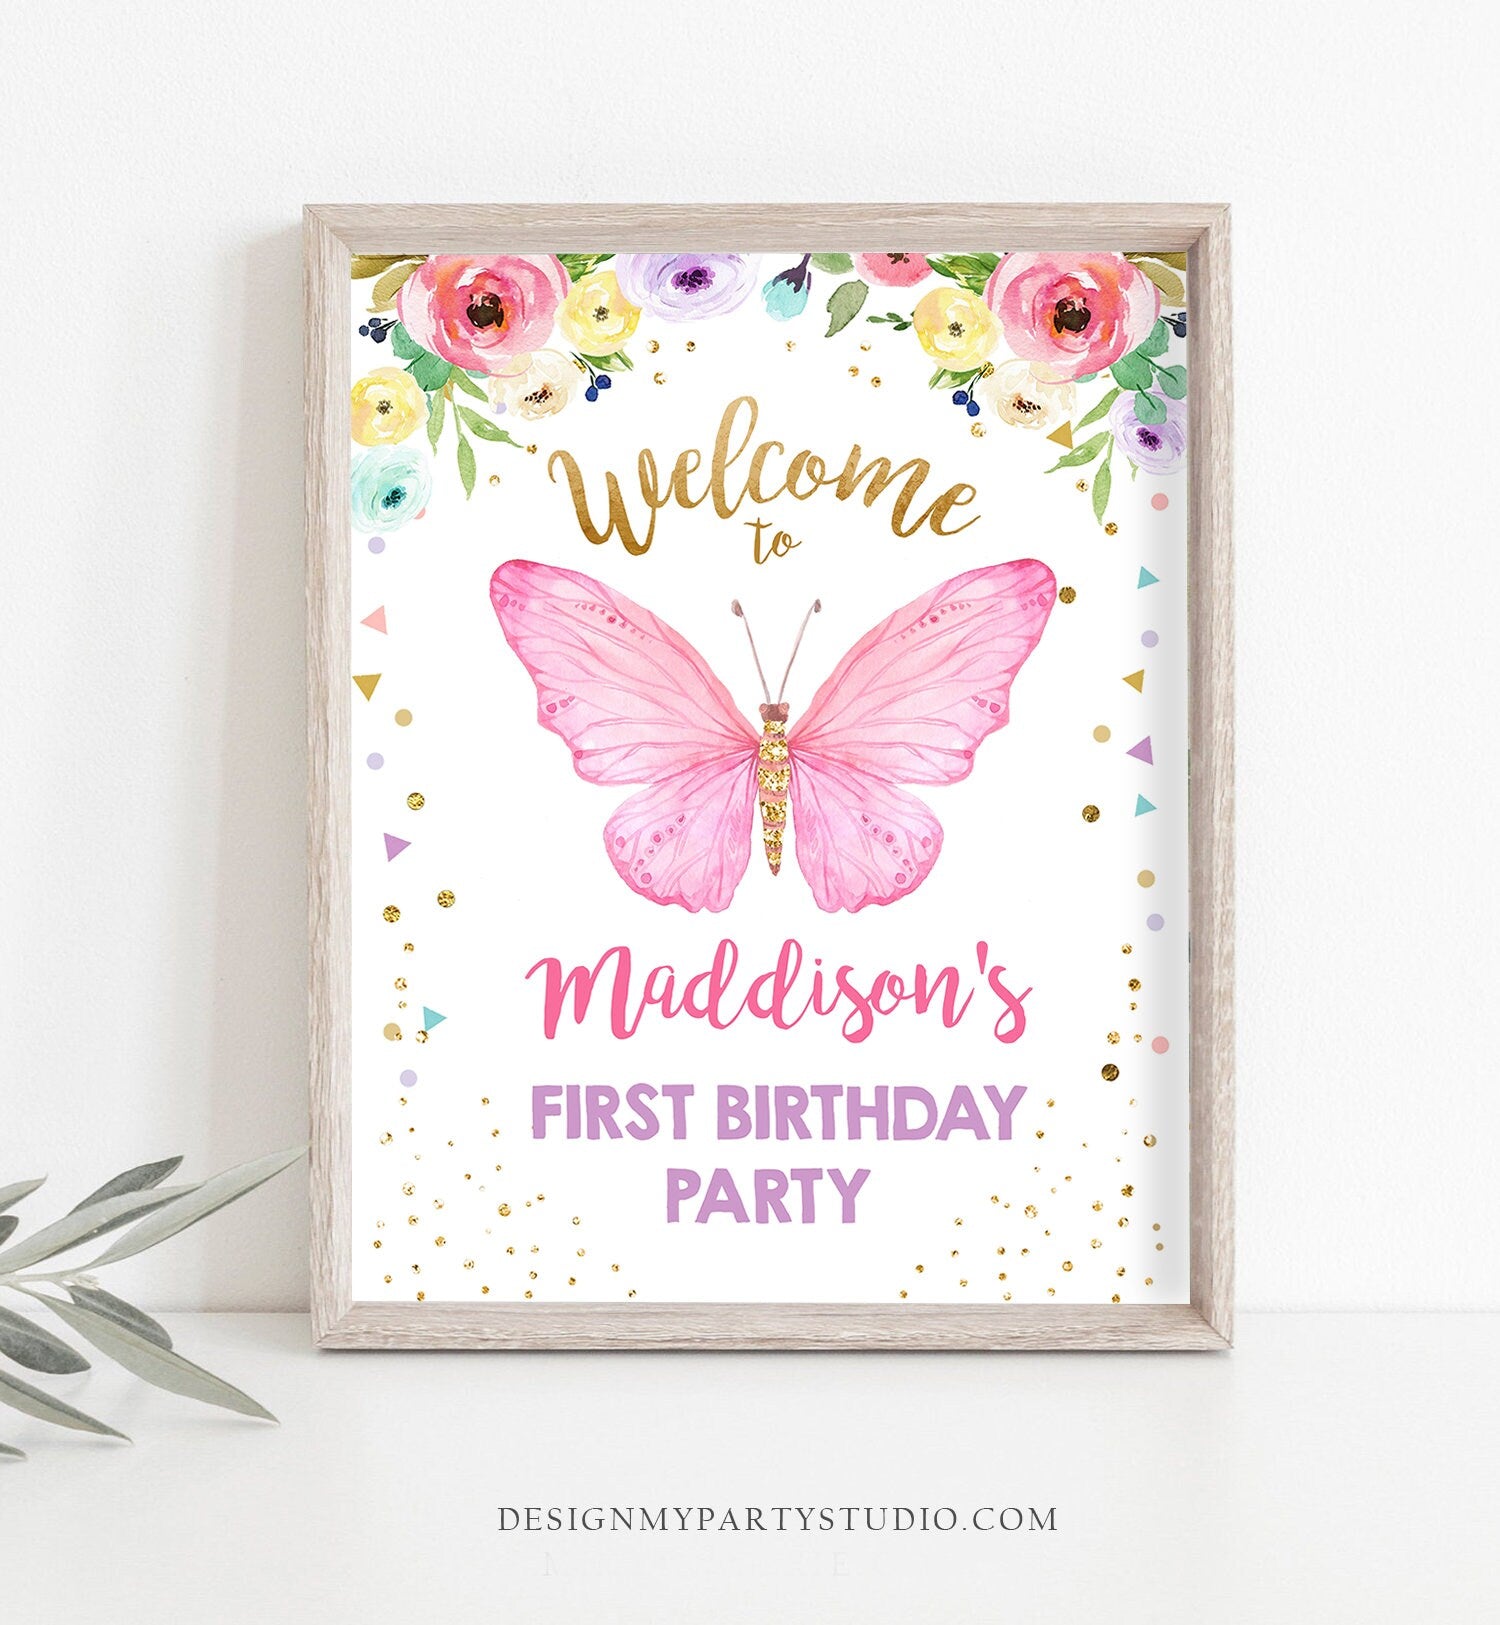 Editable Butterfly Welcome Sign Butterfly Birthday Party Butterfly Welcome Garden Girl Pink Gold Floral Template PRINTABLE Corjl 0162